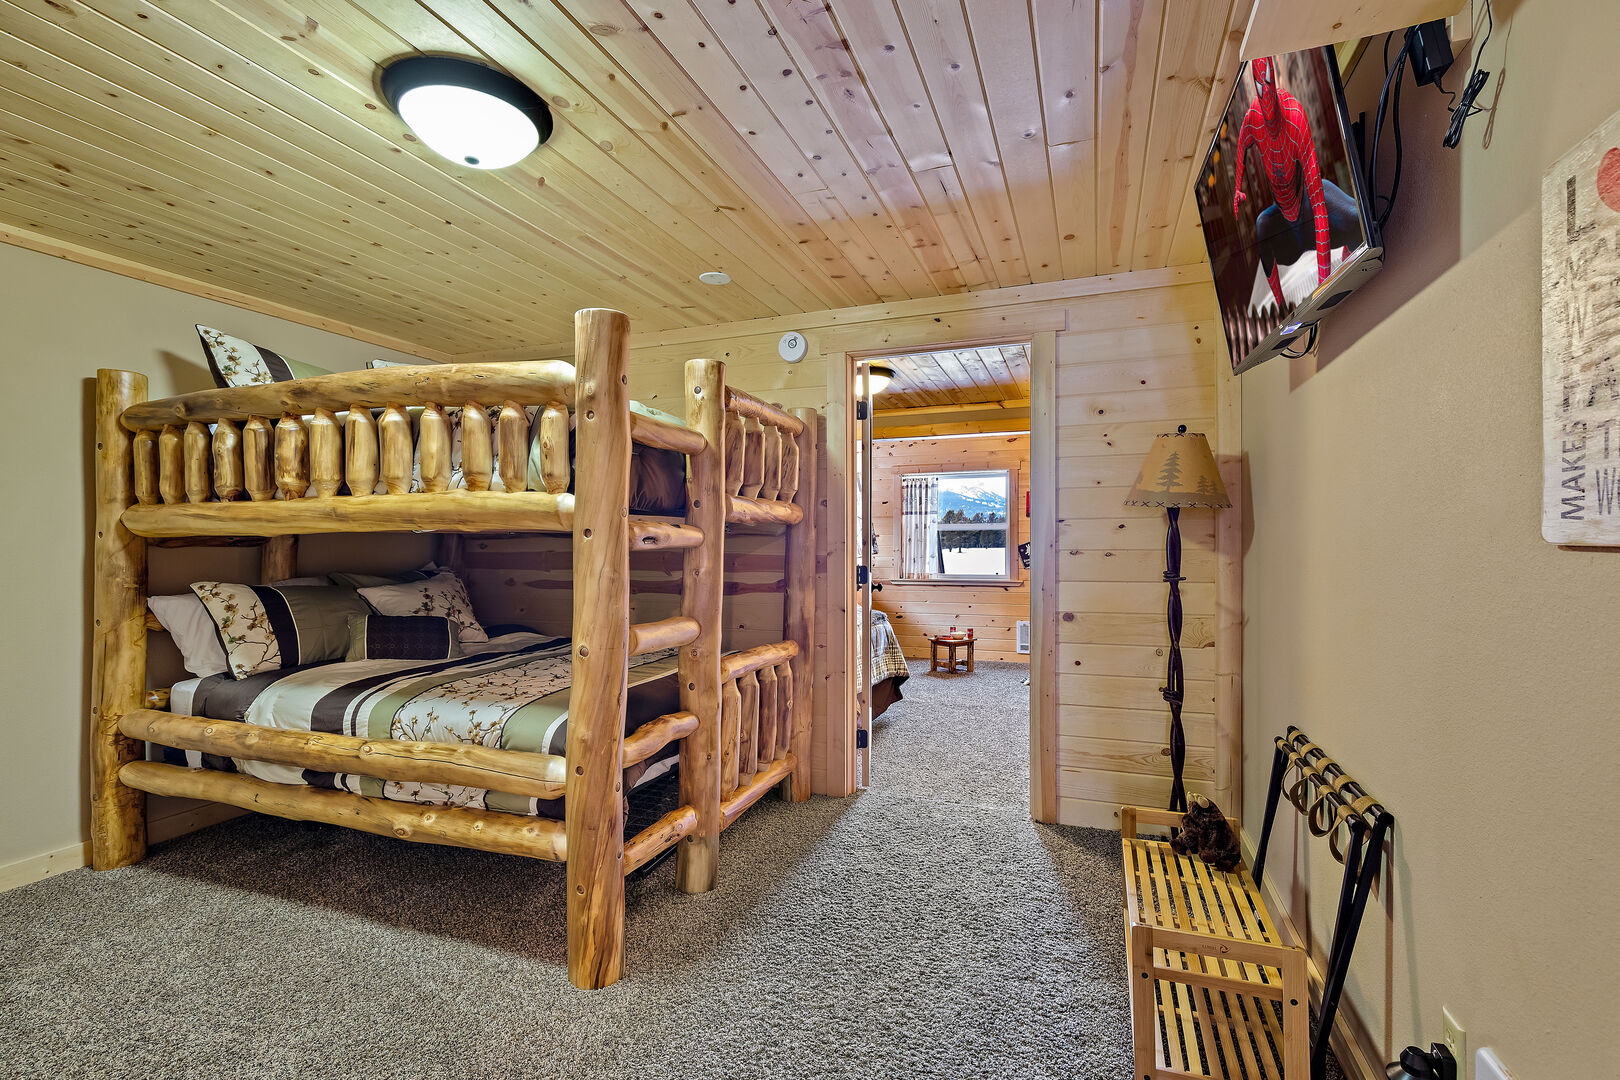 Huckleberry Hollow ~ bedroom #3 / laundry room w/ queen over queen bunk bed and ONLY ACCESS TO ROOM #4